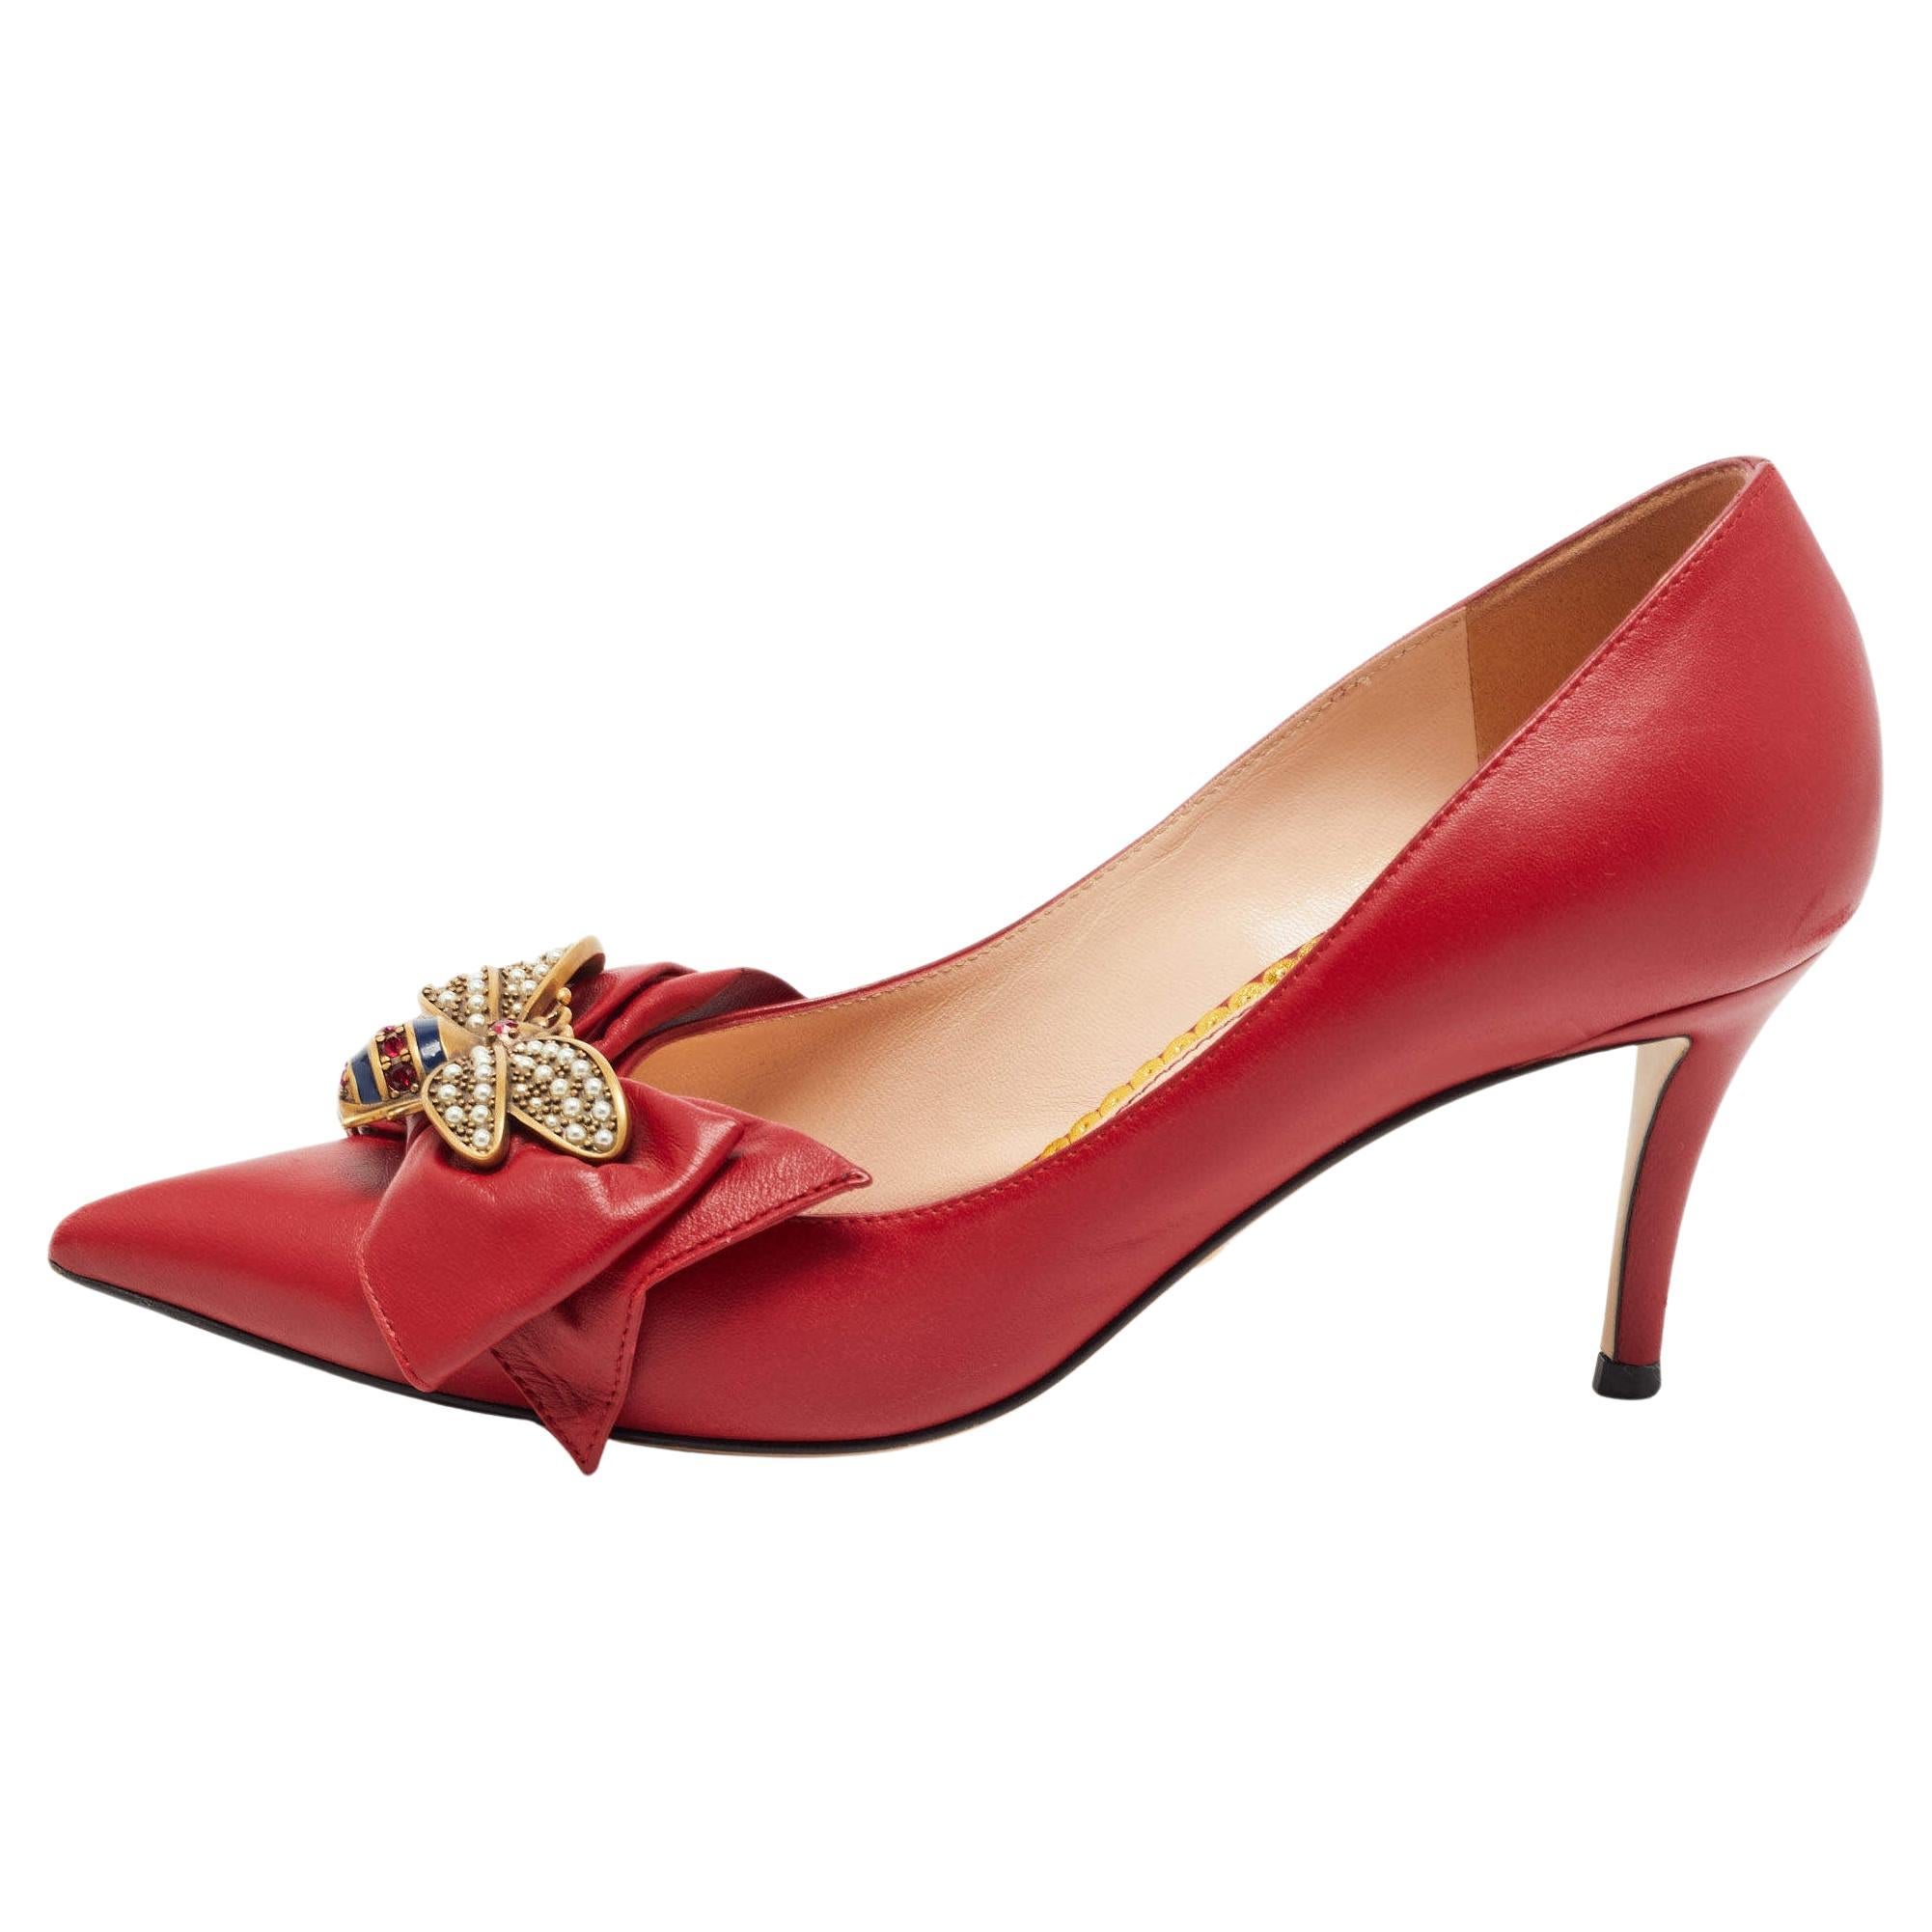 Gucci Red Leather Queen Margaret Pumps Size 38.5